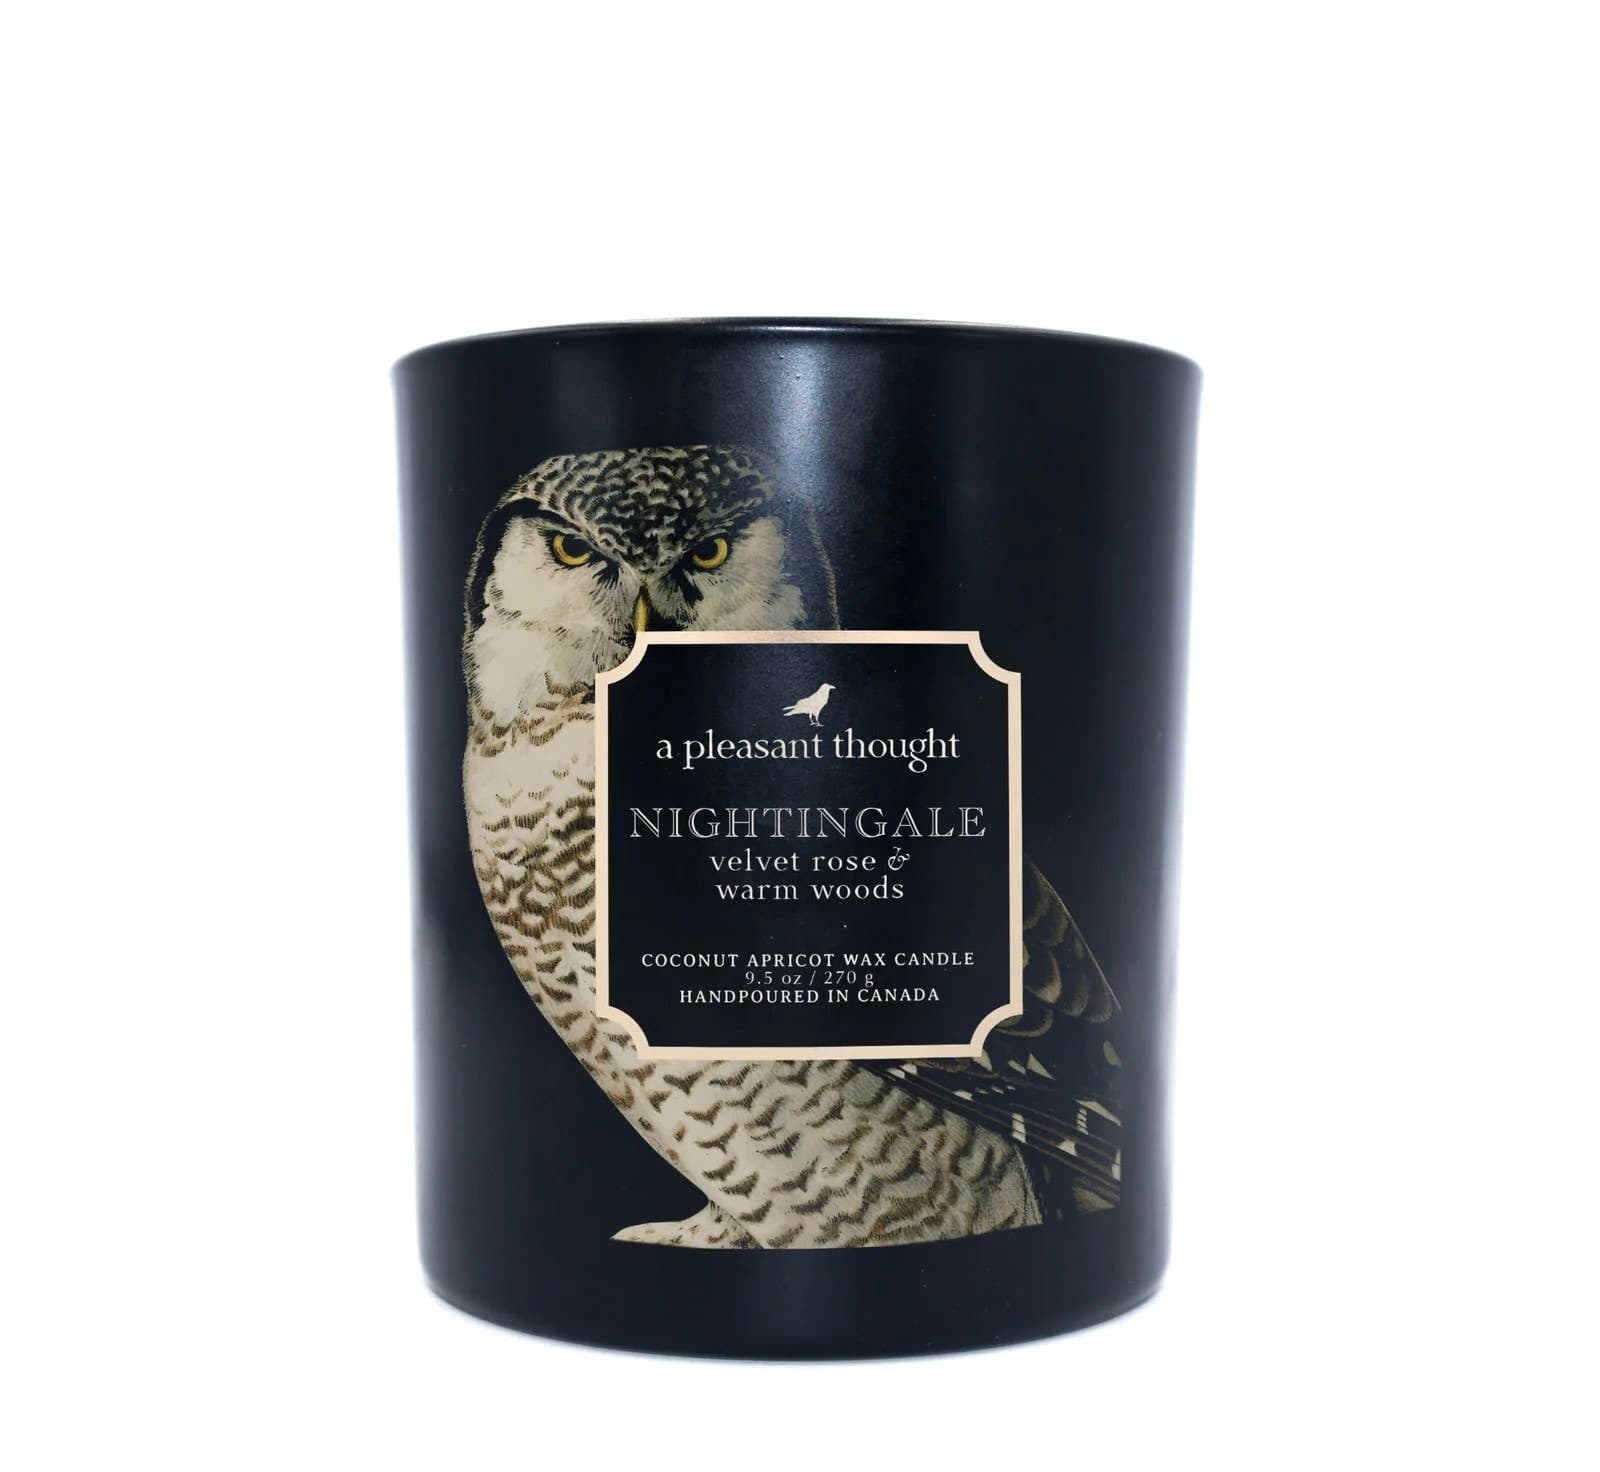 A Pleasant Thought NIGHTINGALE | VELVET ROSE & WARM WOODS | RAVEN CANDLE: Wood